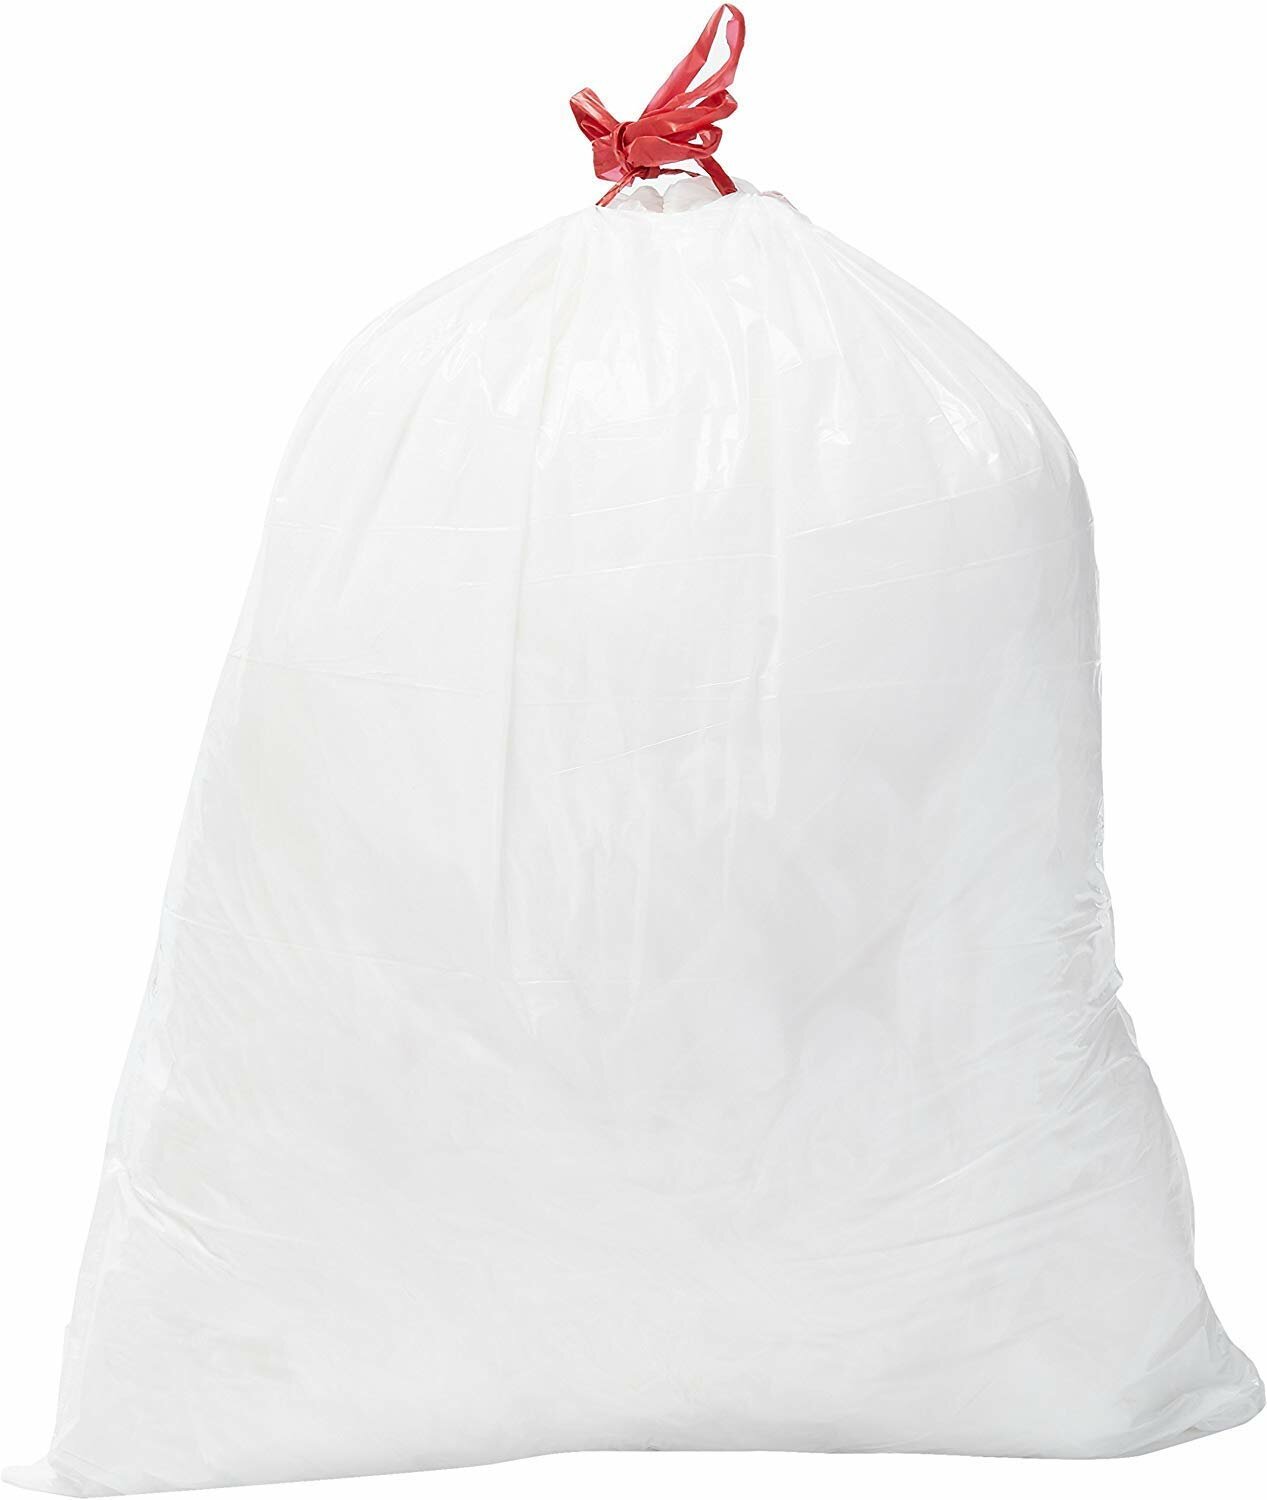 55 Gallon Trash Bags, (Value Pack 50 Count w/Ties) Extra Large Black  Outdoor Trash Bags, 60 Gal, 55 Gal, 50 Gallon Trash Can Liners Black 50  Count